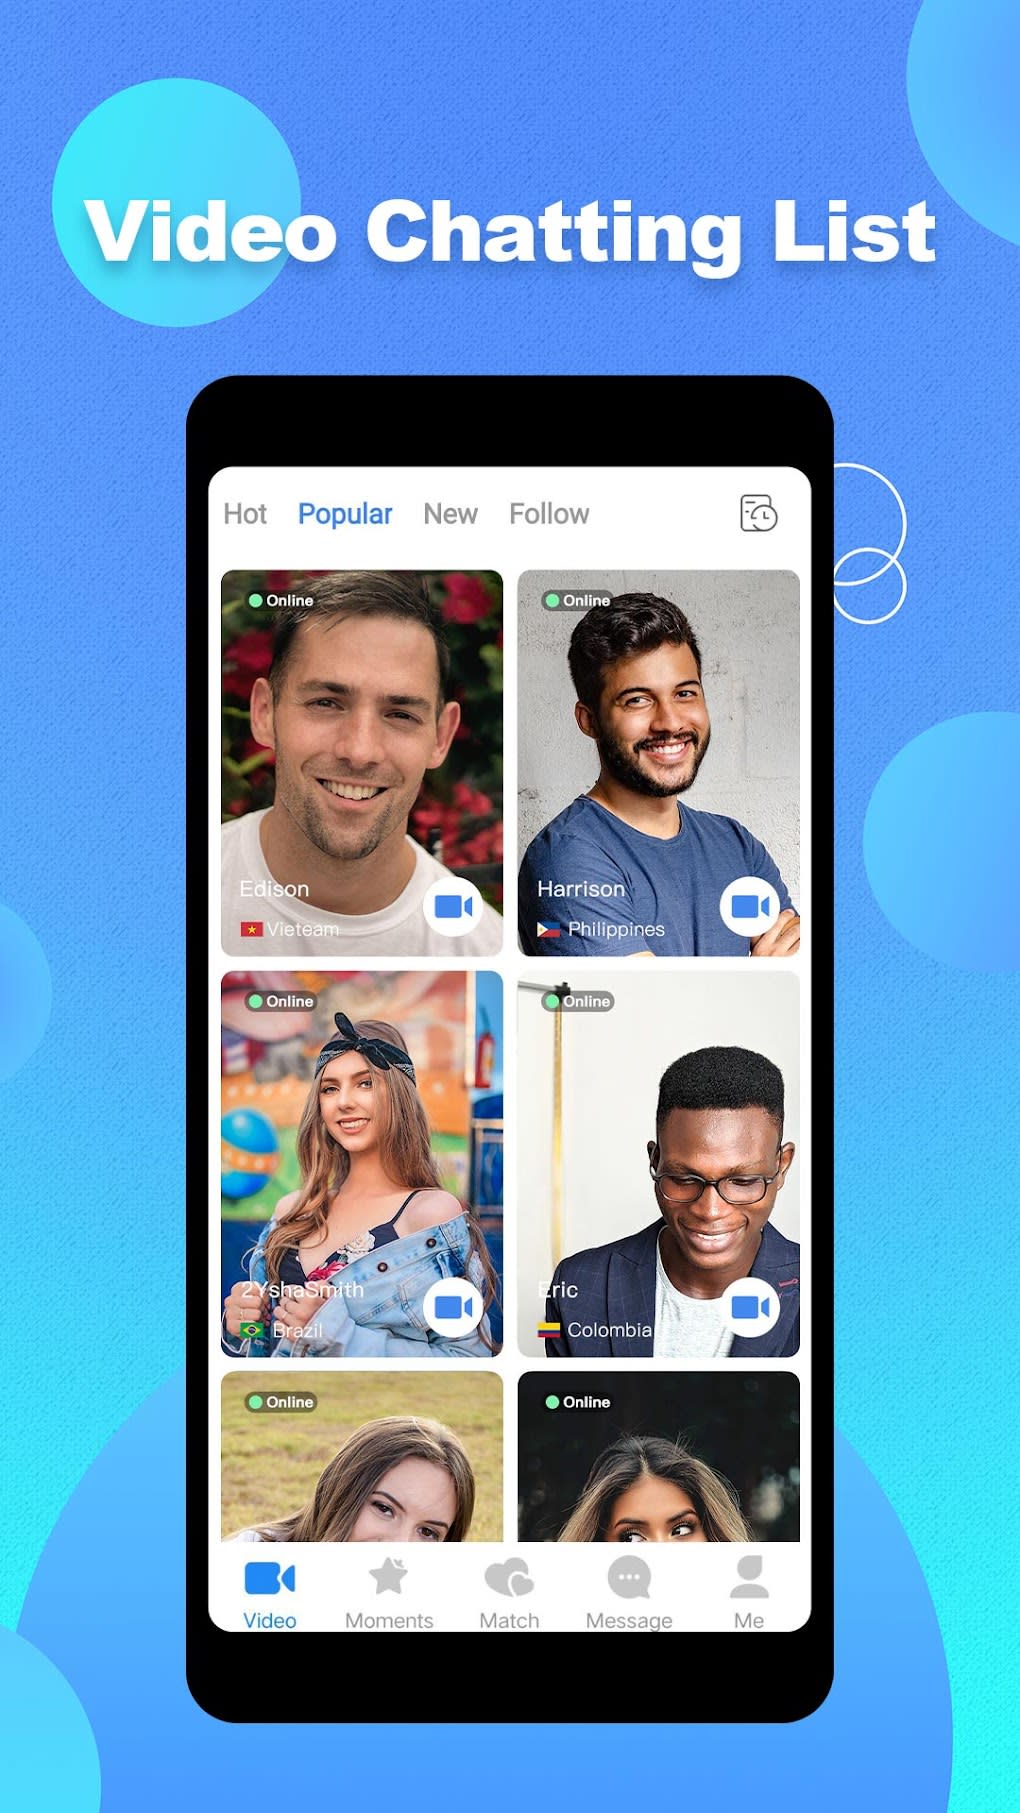 Online Video Call App for Businesses: Use It for FREE